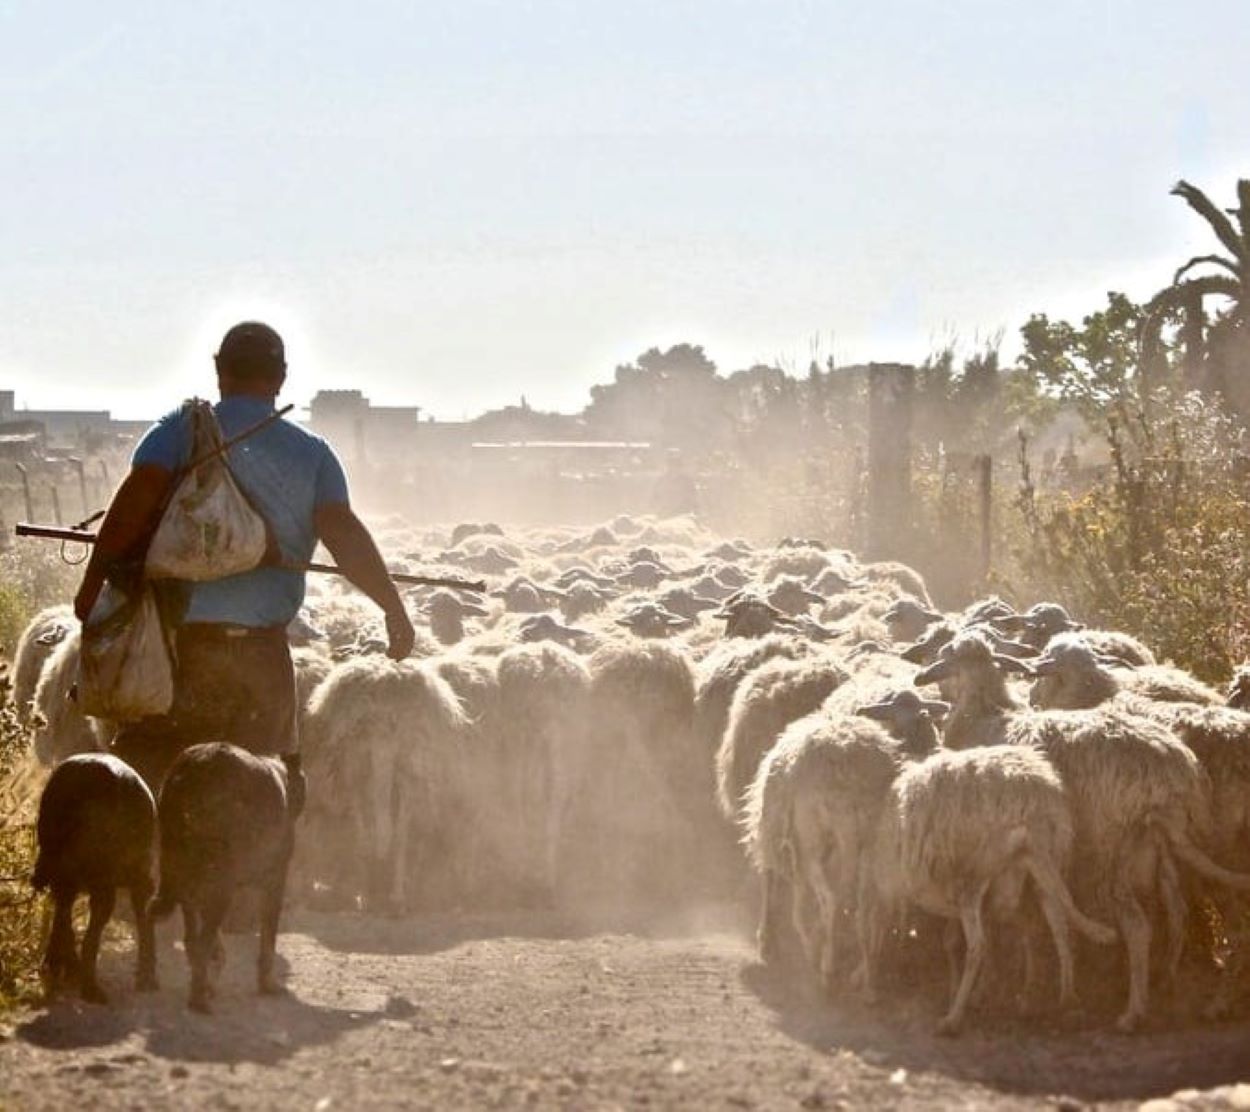 A shepherd with his sheep